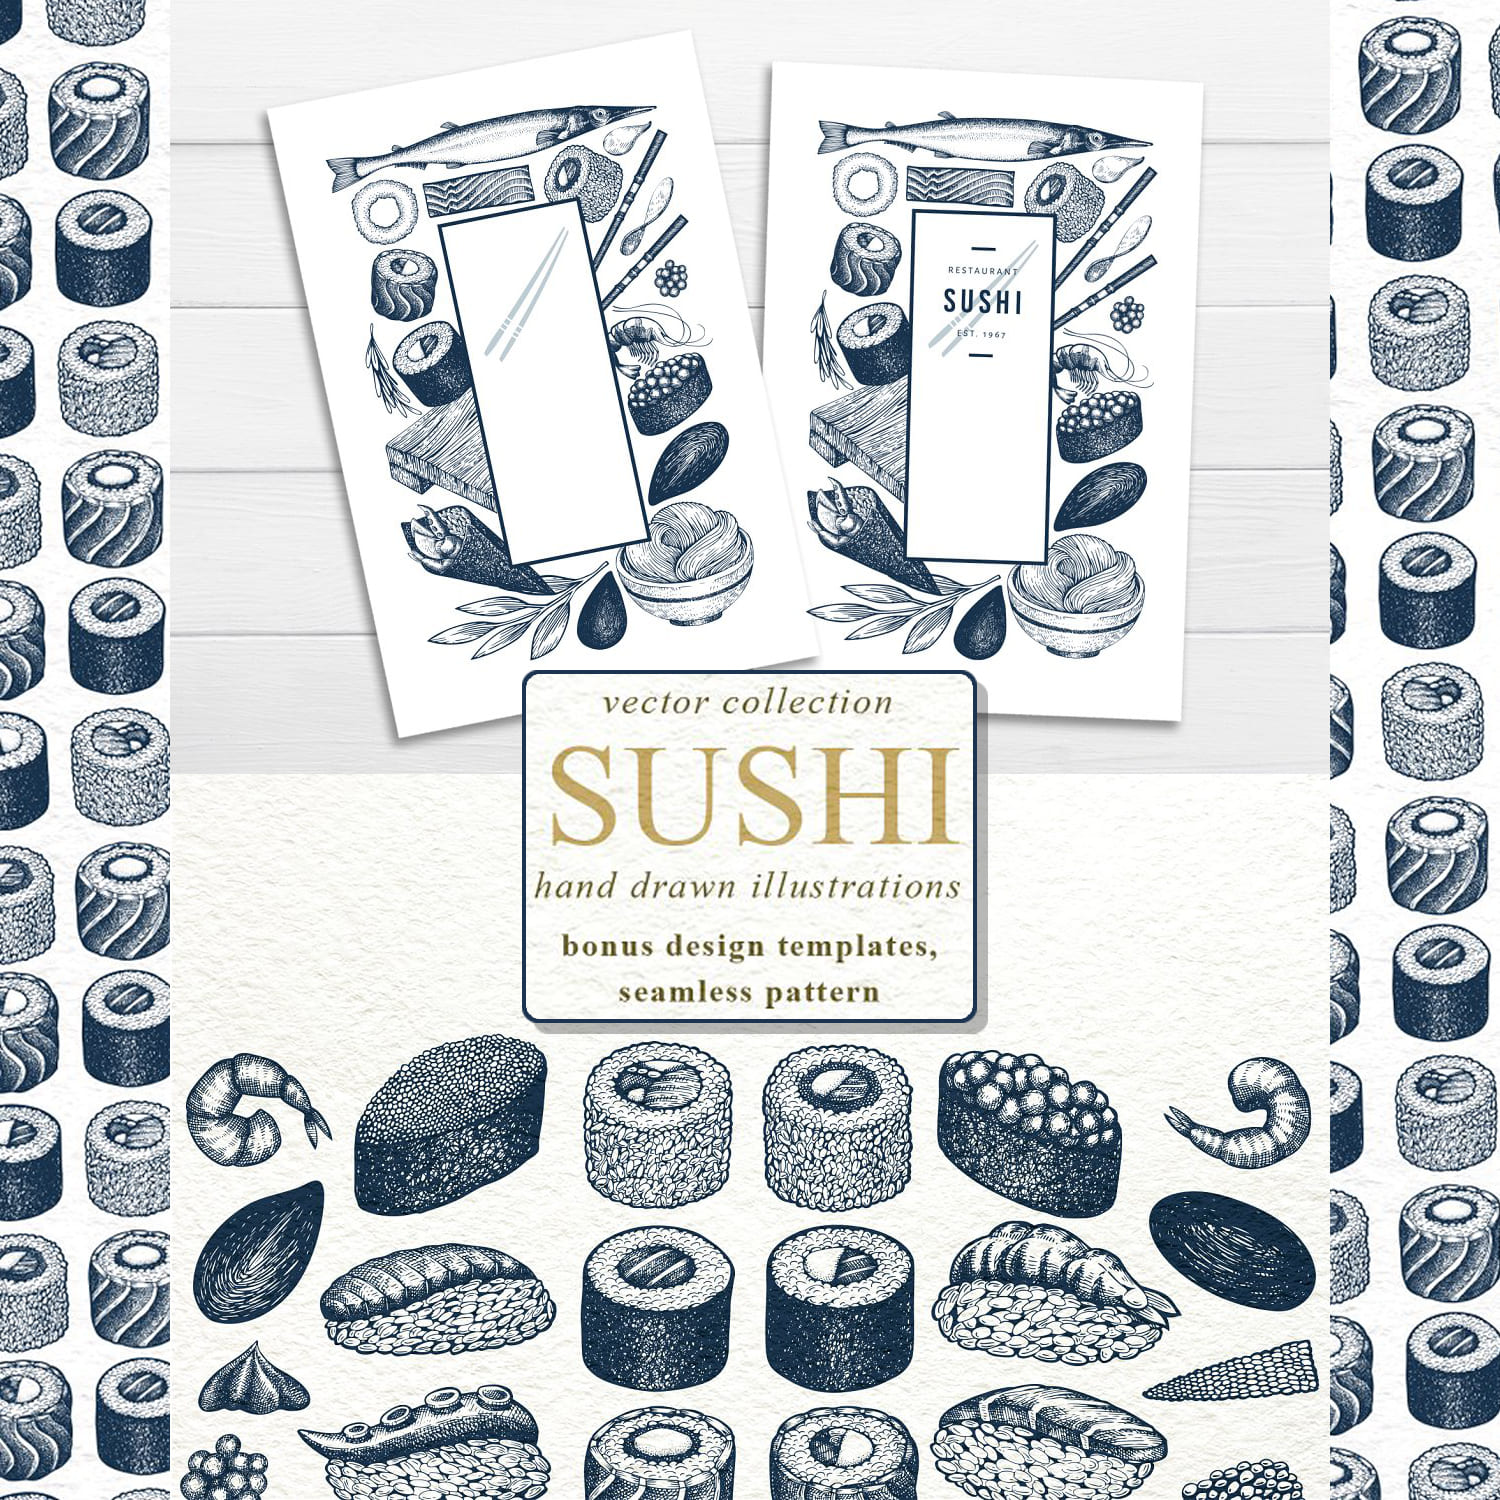 Sushi Vector Collection cover image.